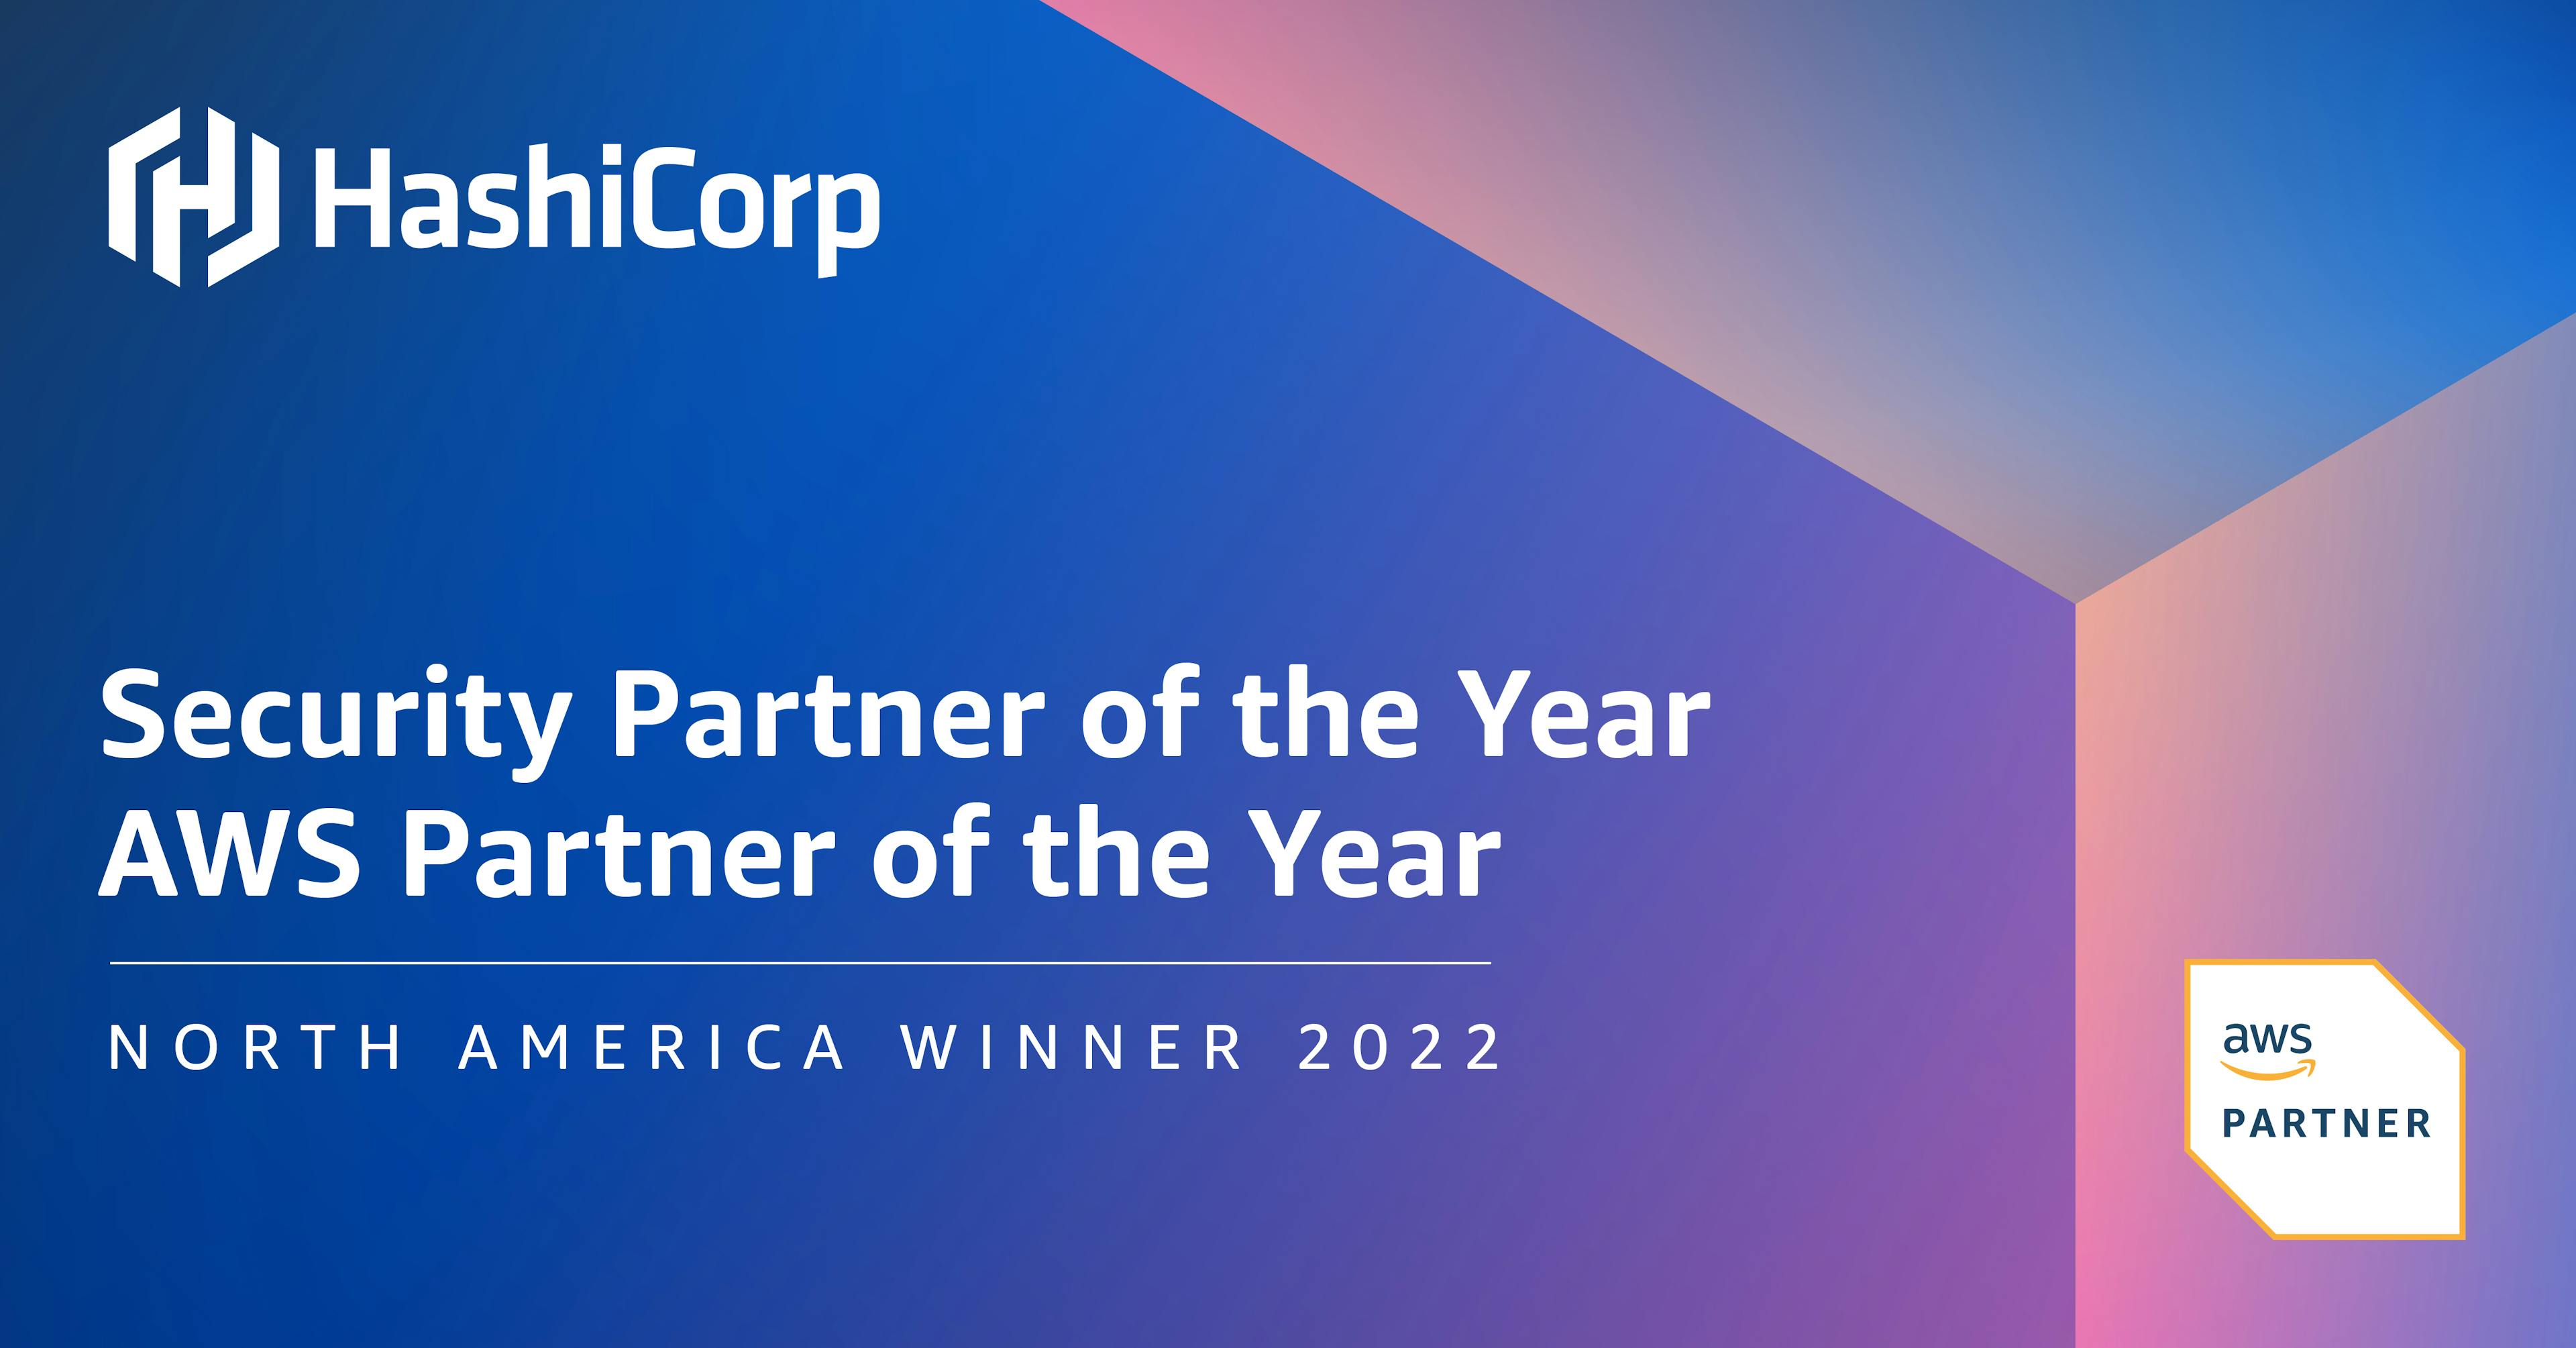 Security Partner of the Year AWS Partner of the Year Award